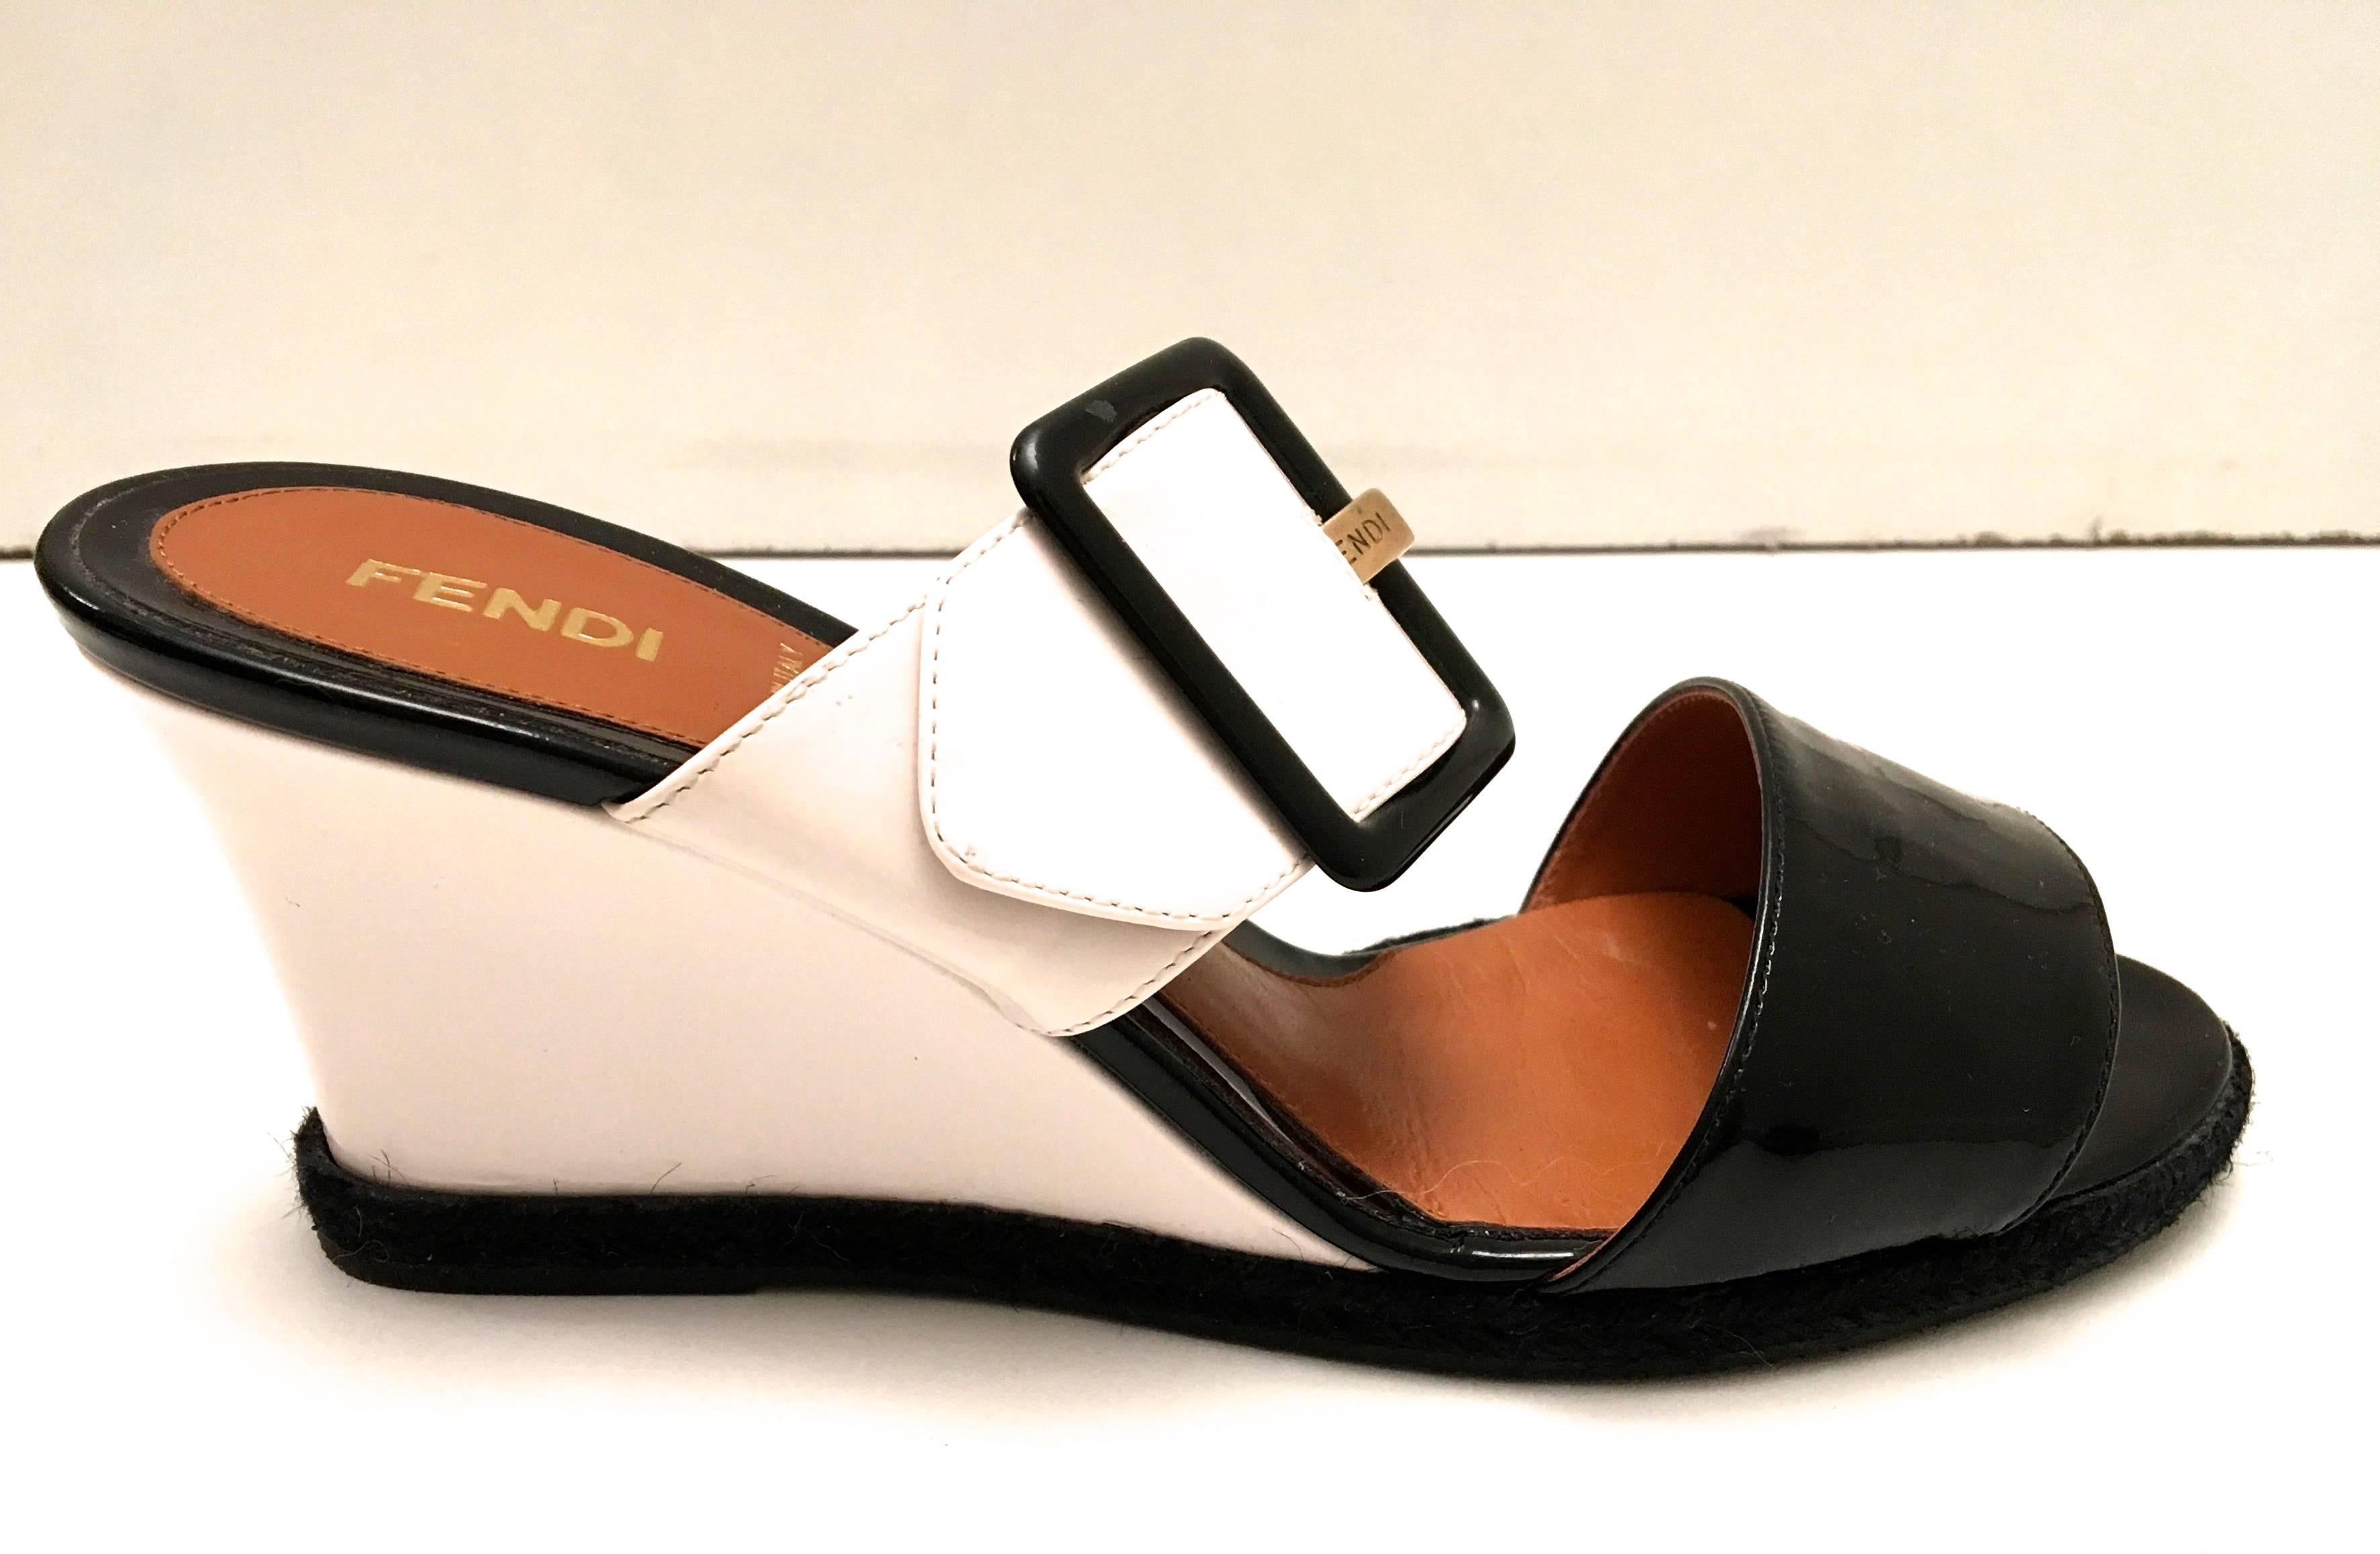 Presented here is a beautiful pair of Fendi wedges. This beautiful pair of shoes is a size 37.5. The shoes are new and have only been worn for a few fittings in the store. The shoes measure 8.75 inches in total length. The size of the wedge heel